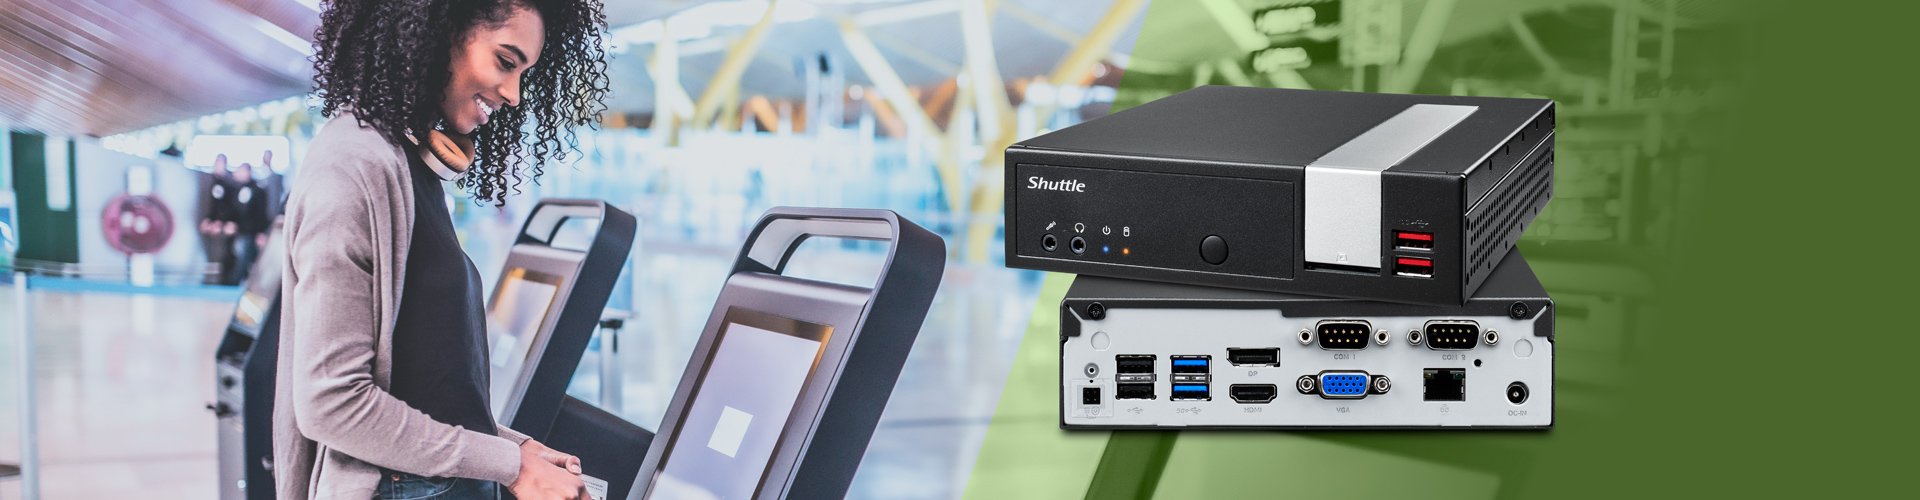 More information about "Shuttle XPC Slim DL20N6V2 Barebone Review"